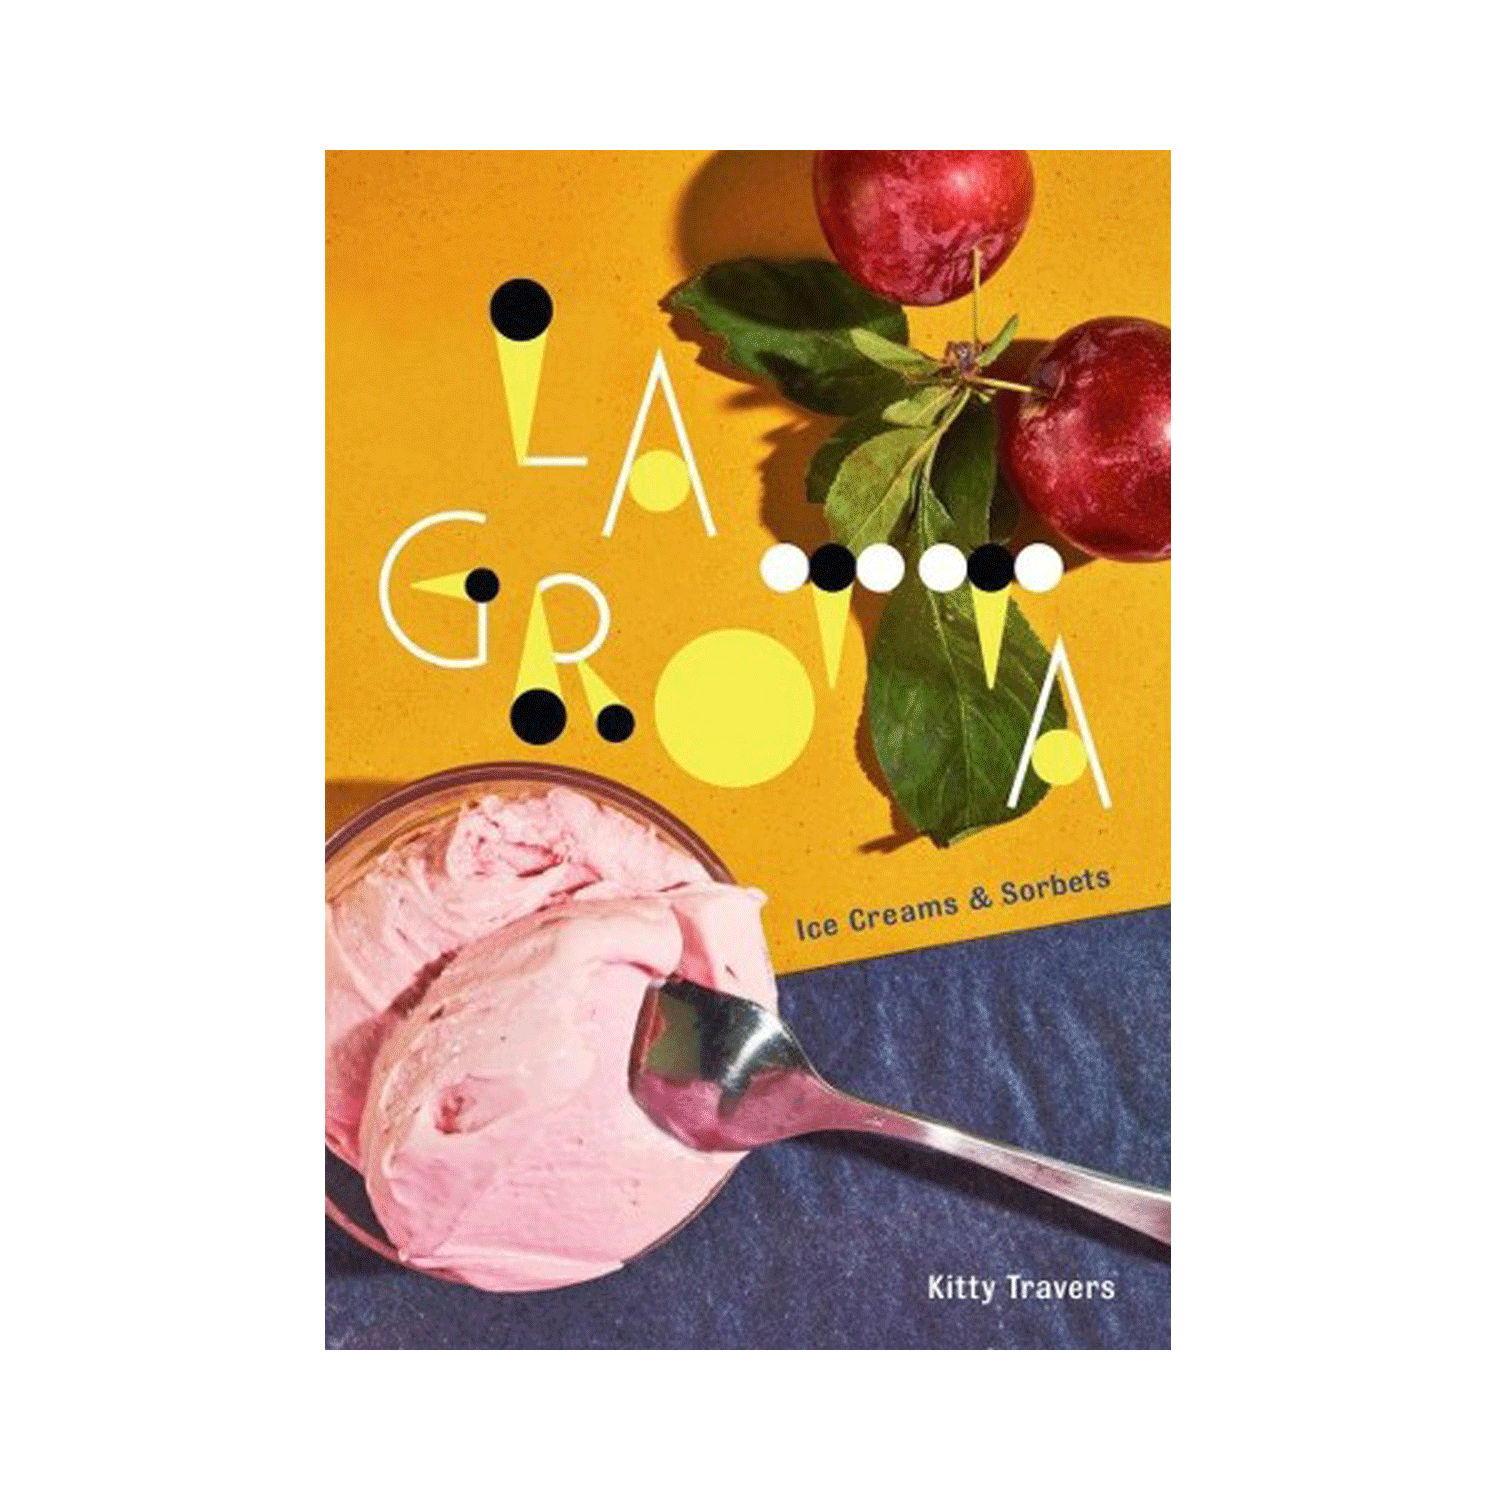 La Grotta: Ice Creams and Sorbets by Kitty Travers